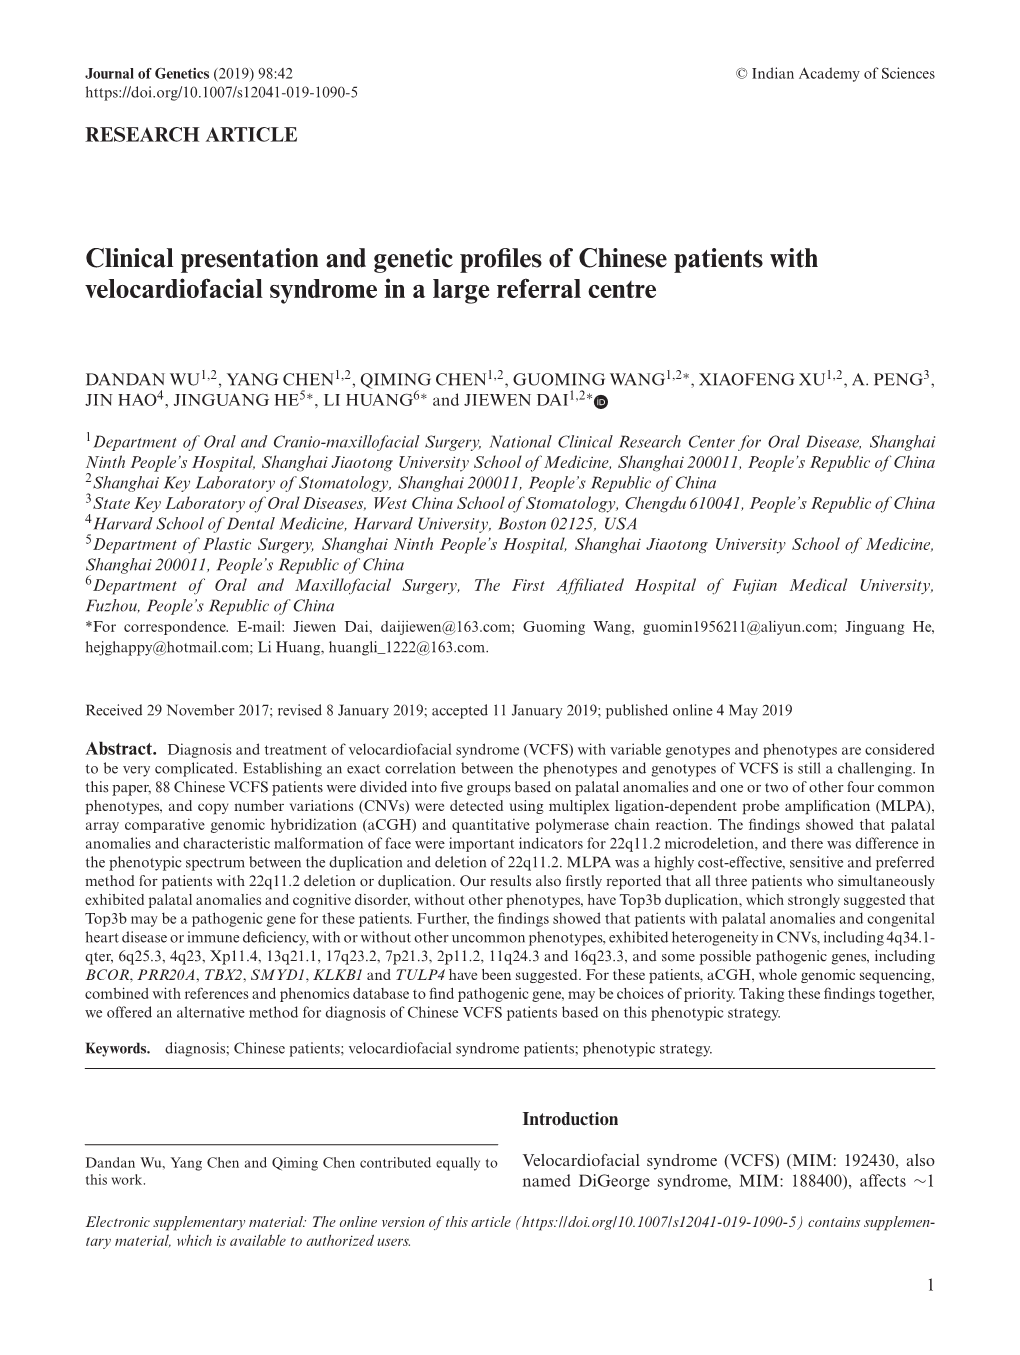 Clinical Presentation and Genetic Profiles of Chinese Patients With